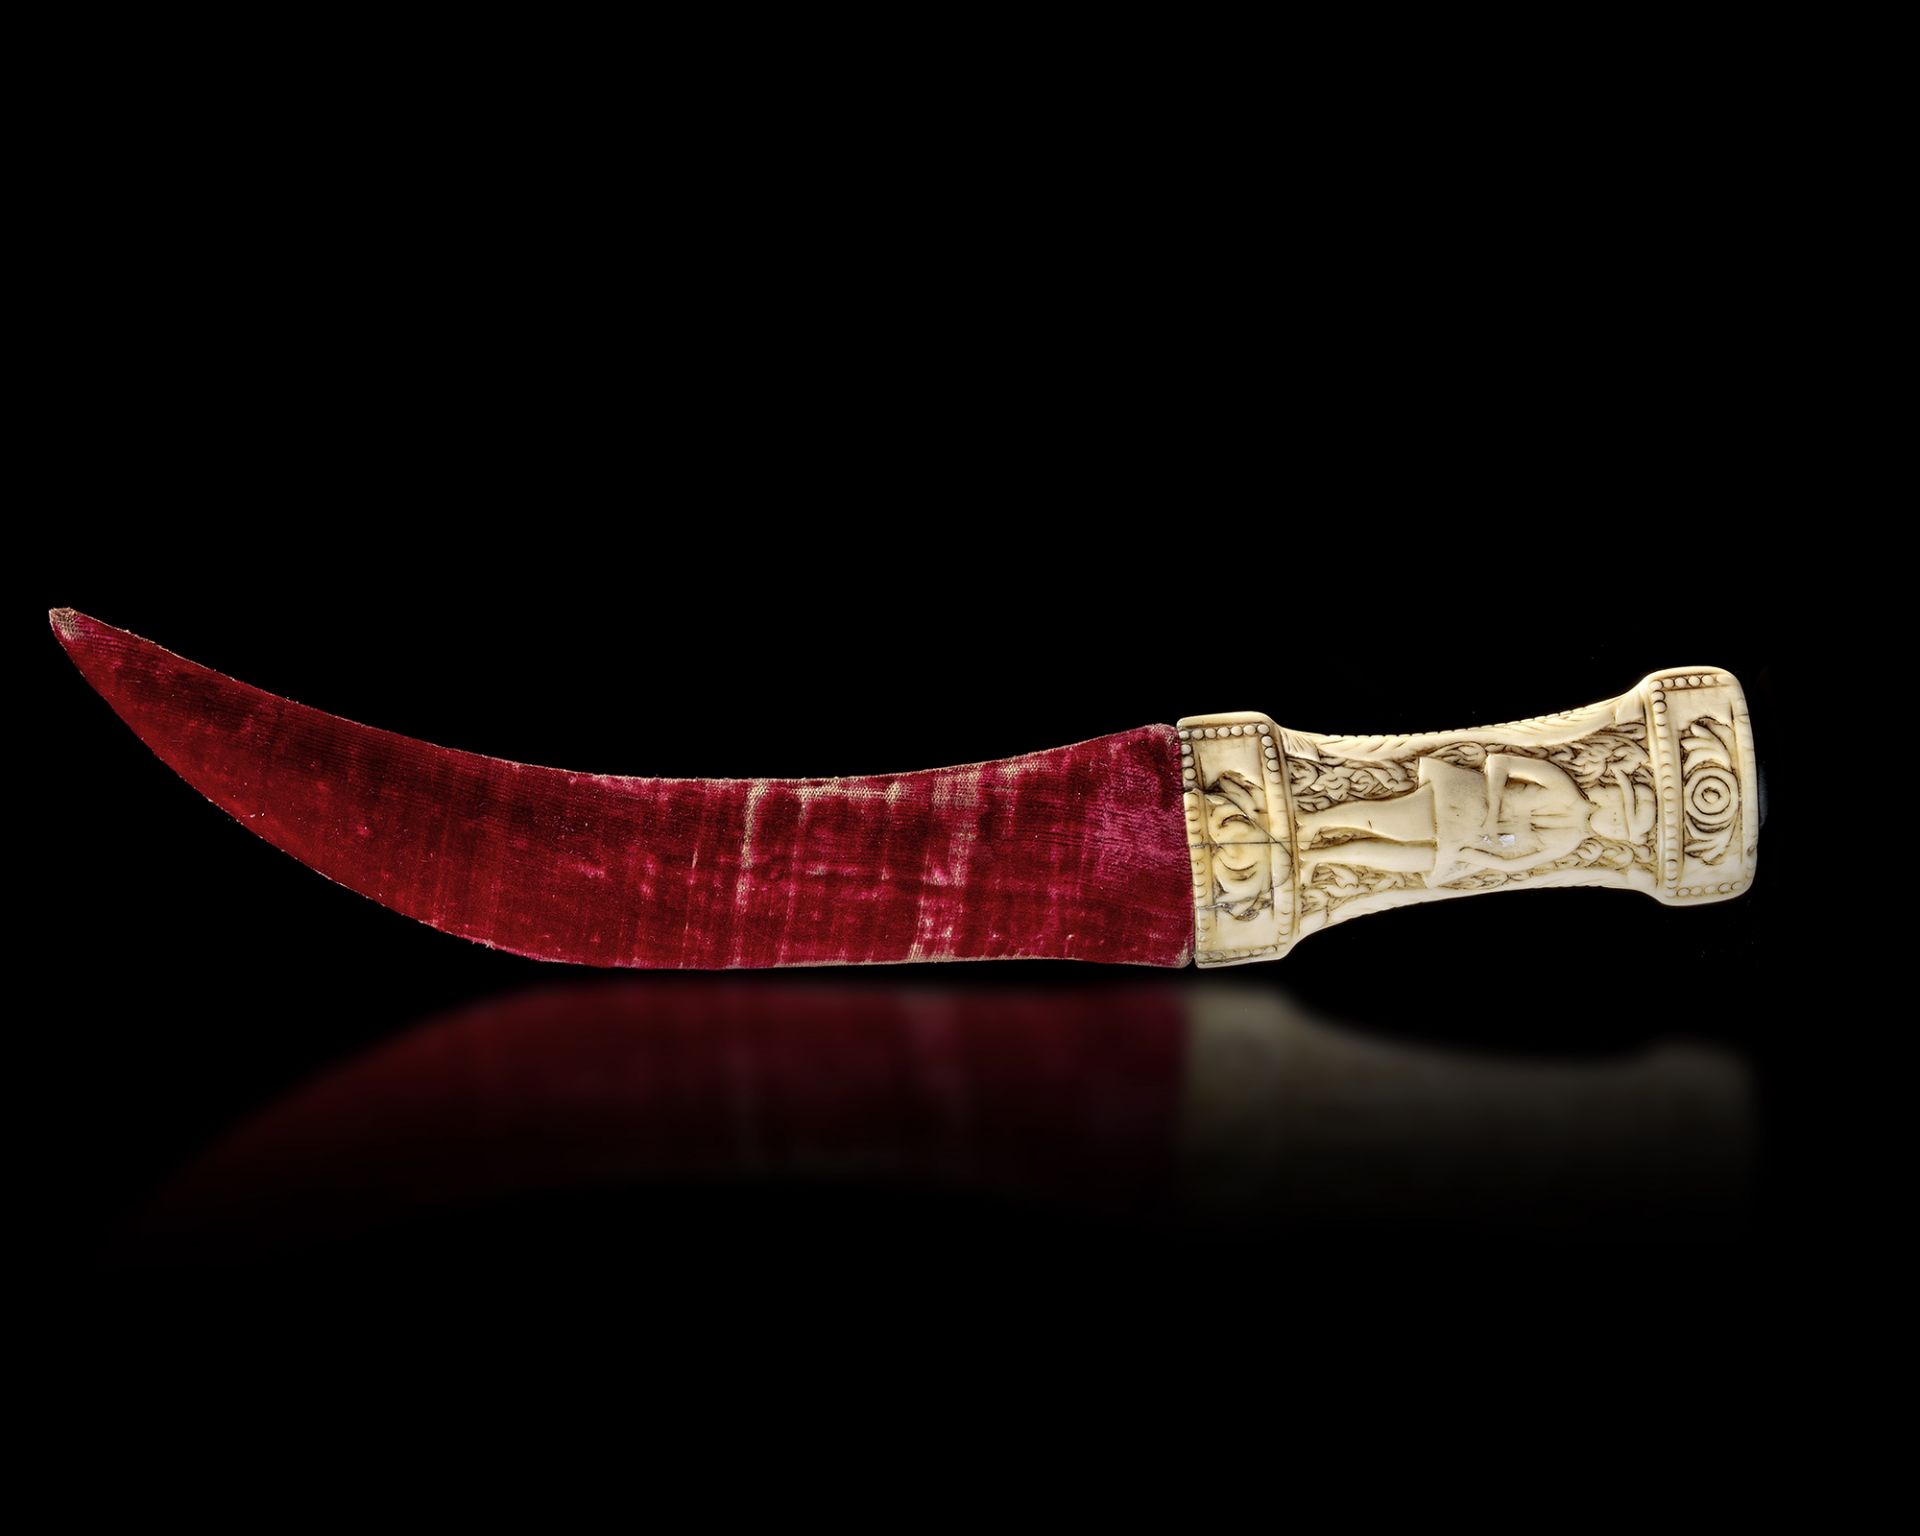 A QAJAR IVORY HILTED DAGGER, PERSIA 19TH CENTURY - Image 3 of 4